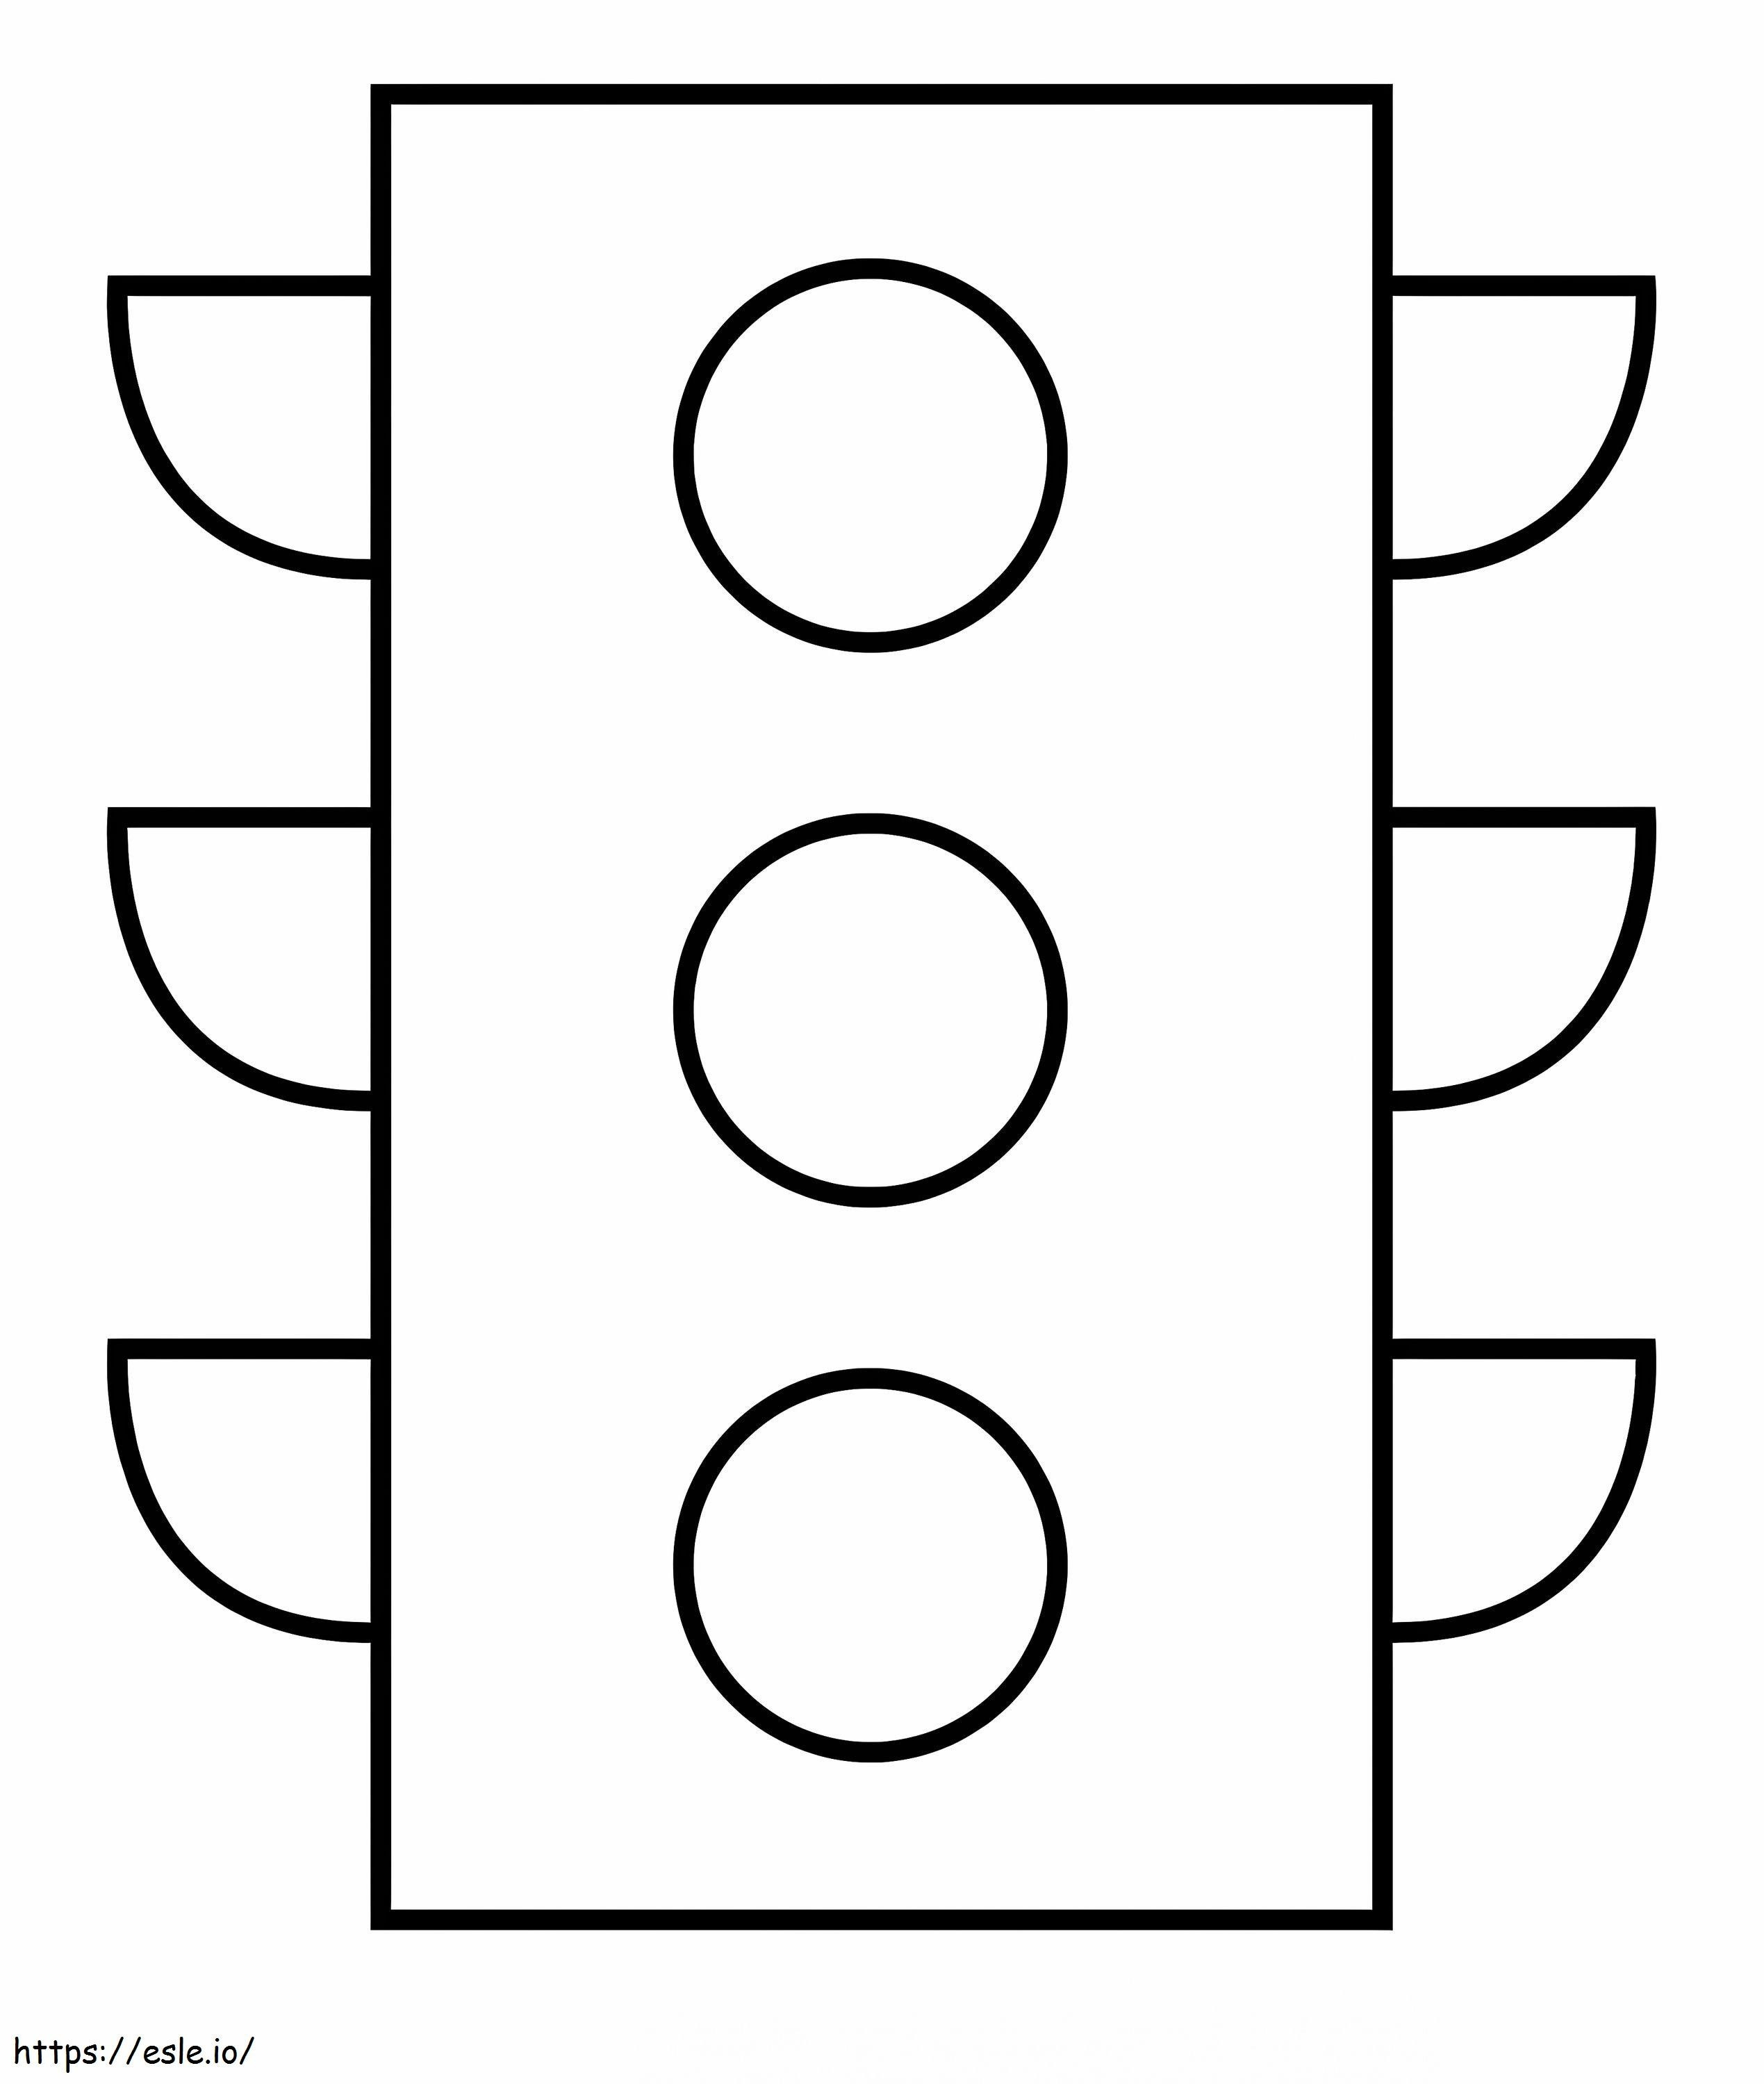 Printable Traffic Light coloring page